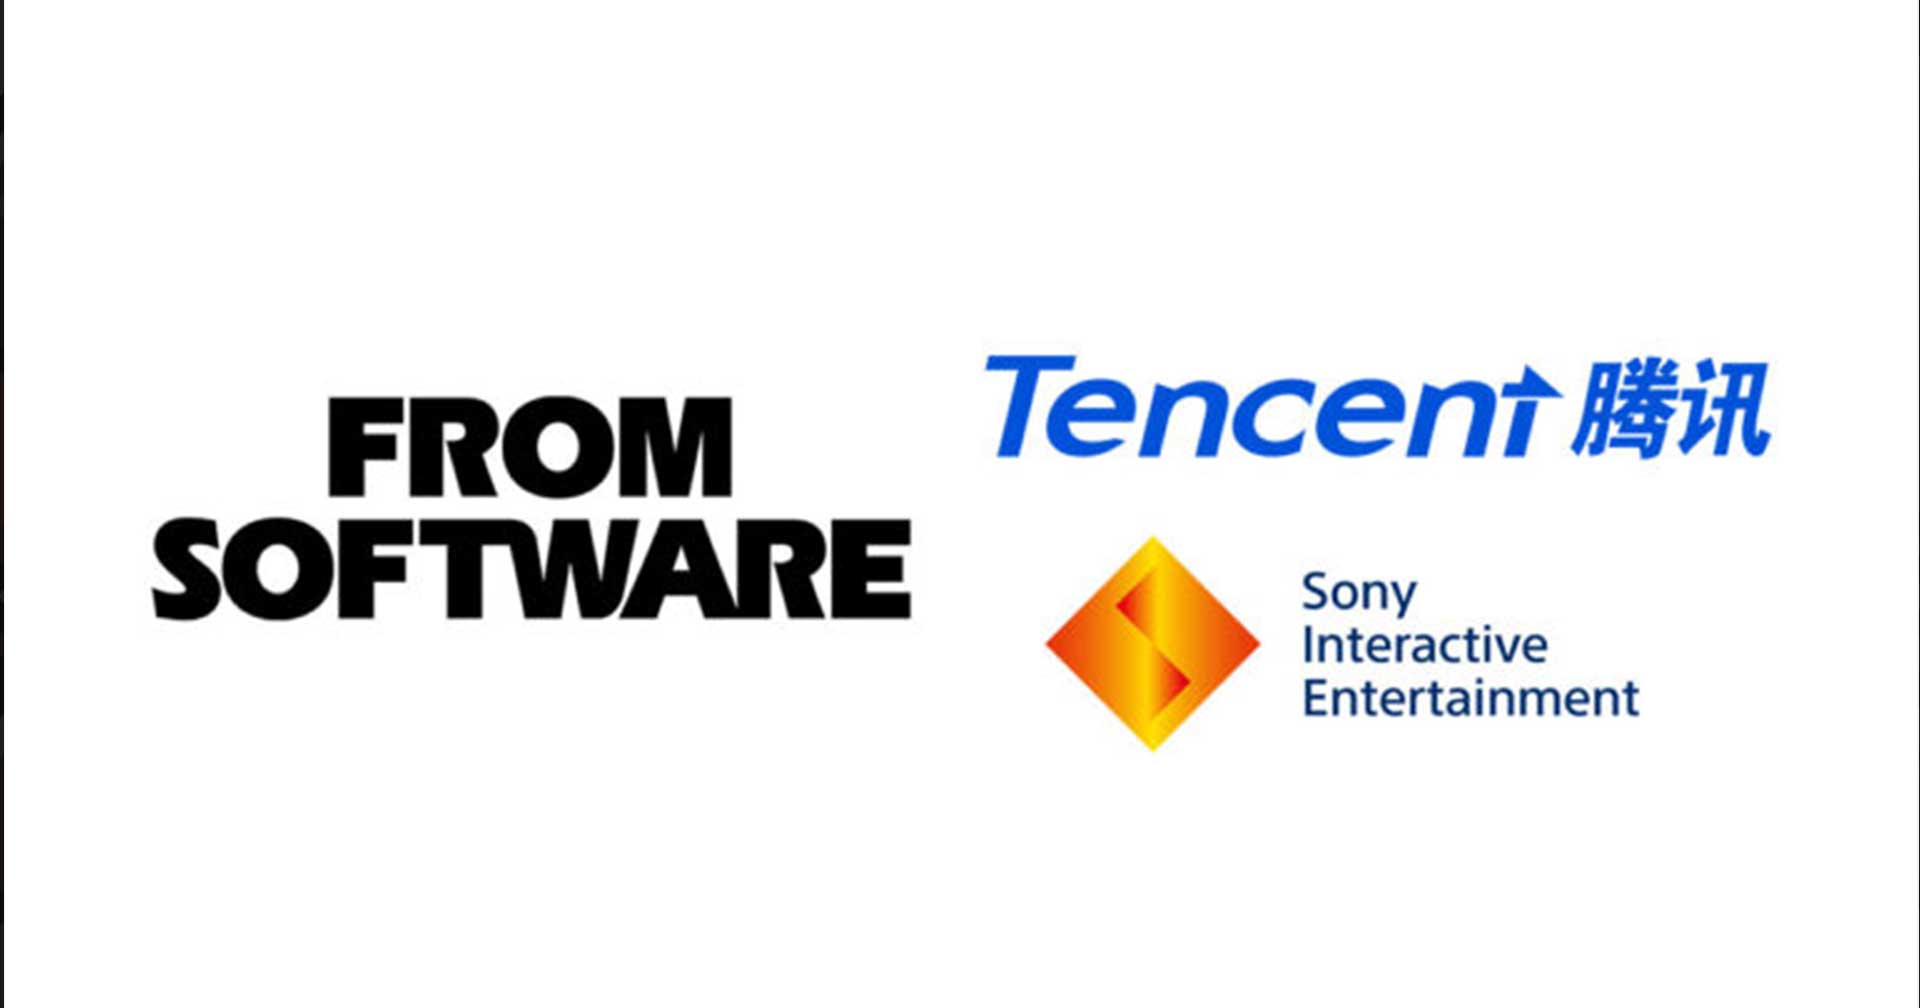 Tencent และ Sony เข้าซื้อหุ้น 30% ของ FromSoftware